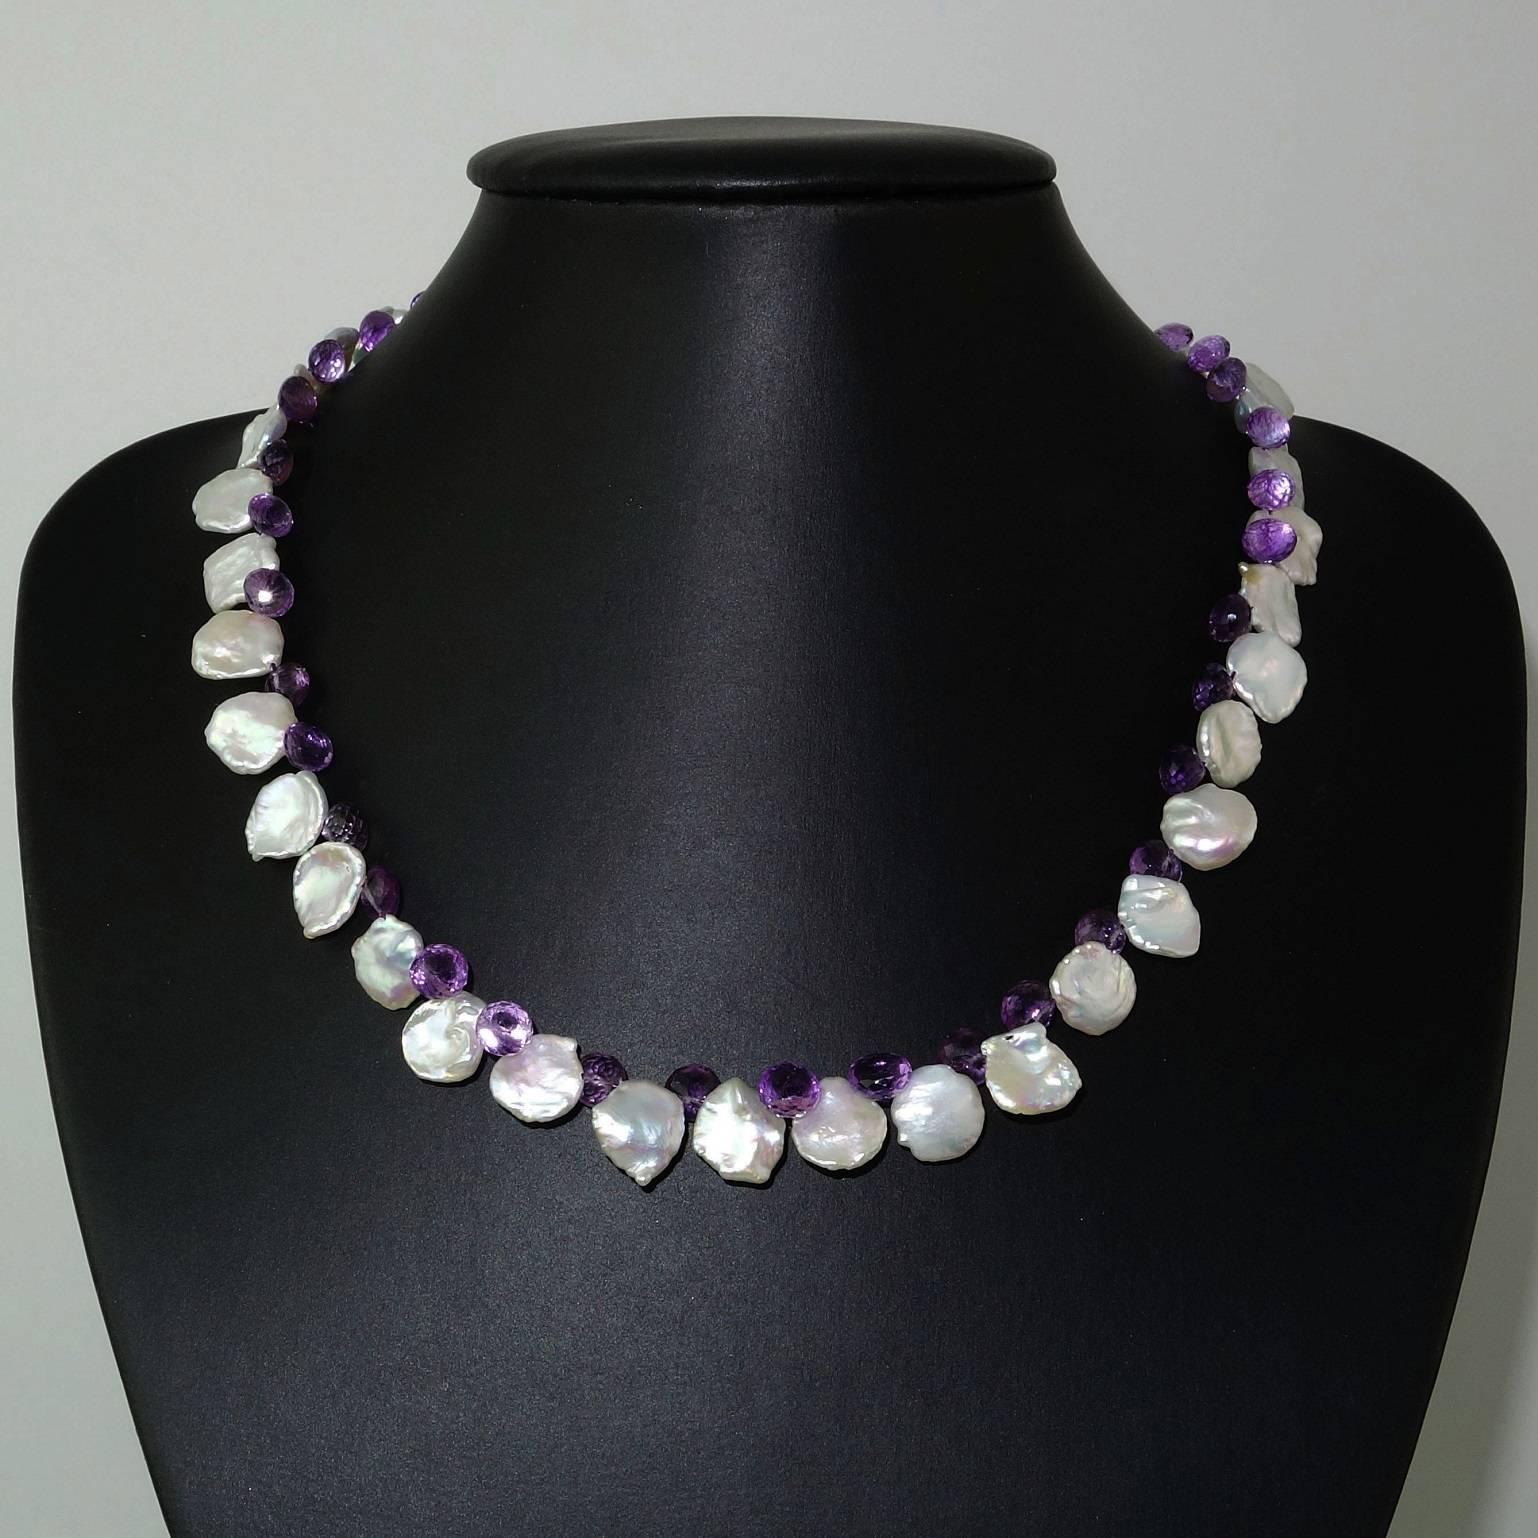 Gemjunky Iridescent White Keshi Pearl and Amethyst Briolette Necklace  4